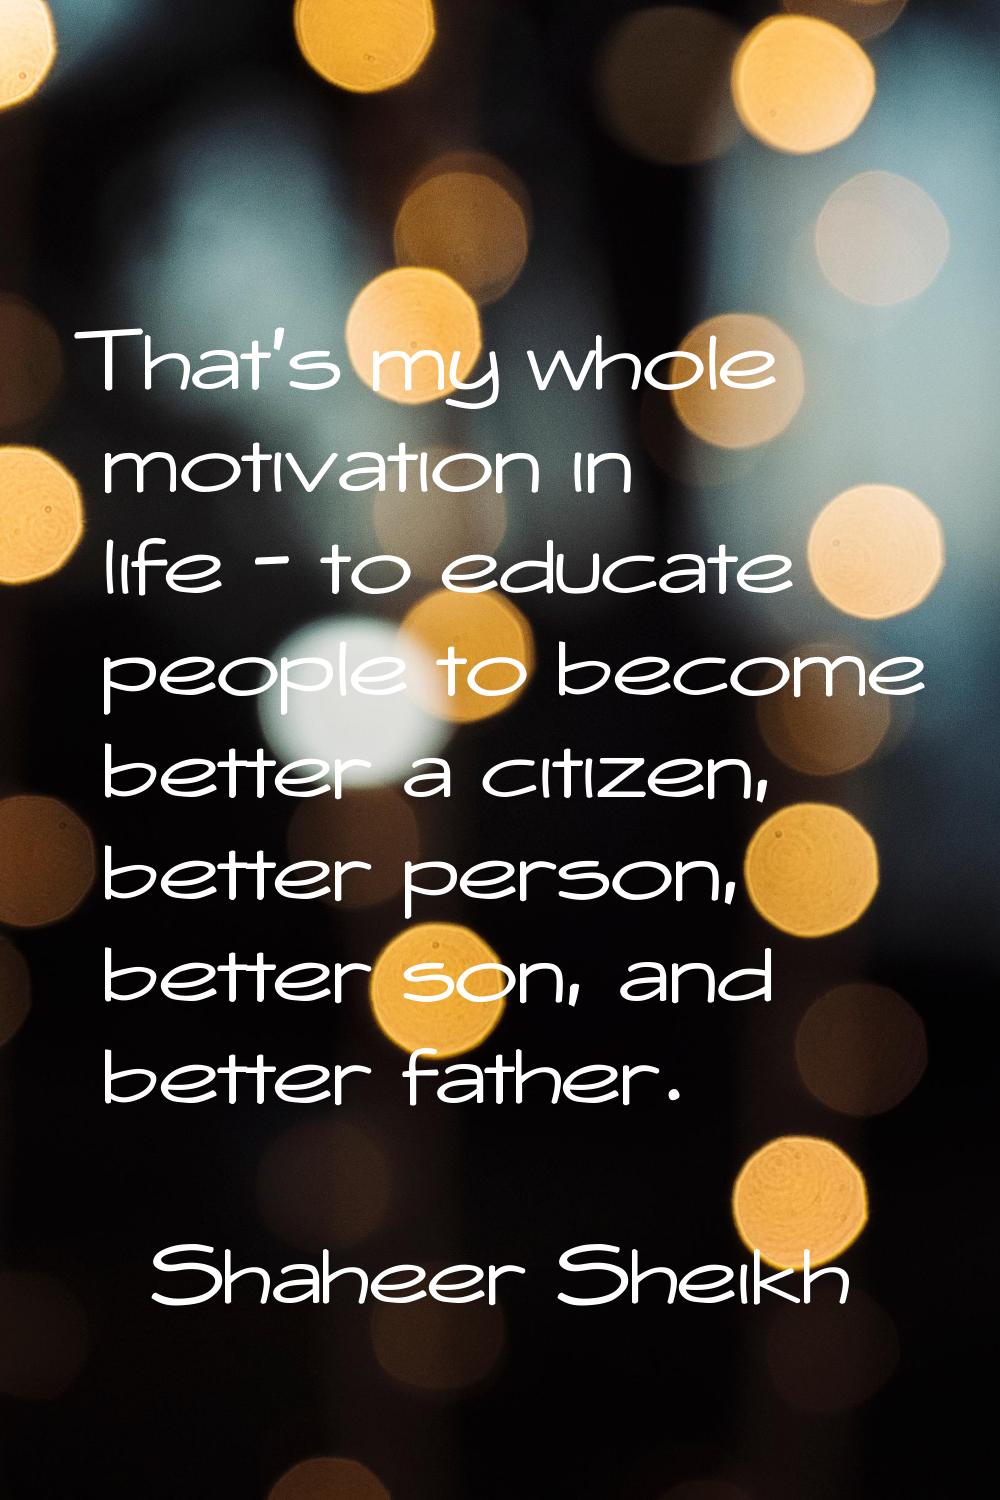 That's my whole motivation in life - to educate people to become better a citizen, better person, b